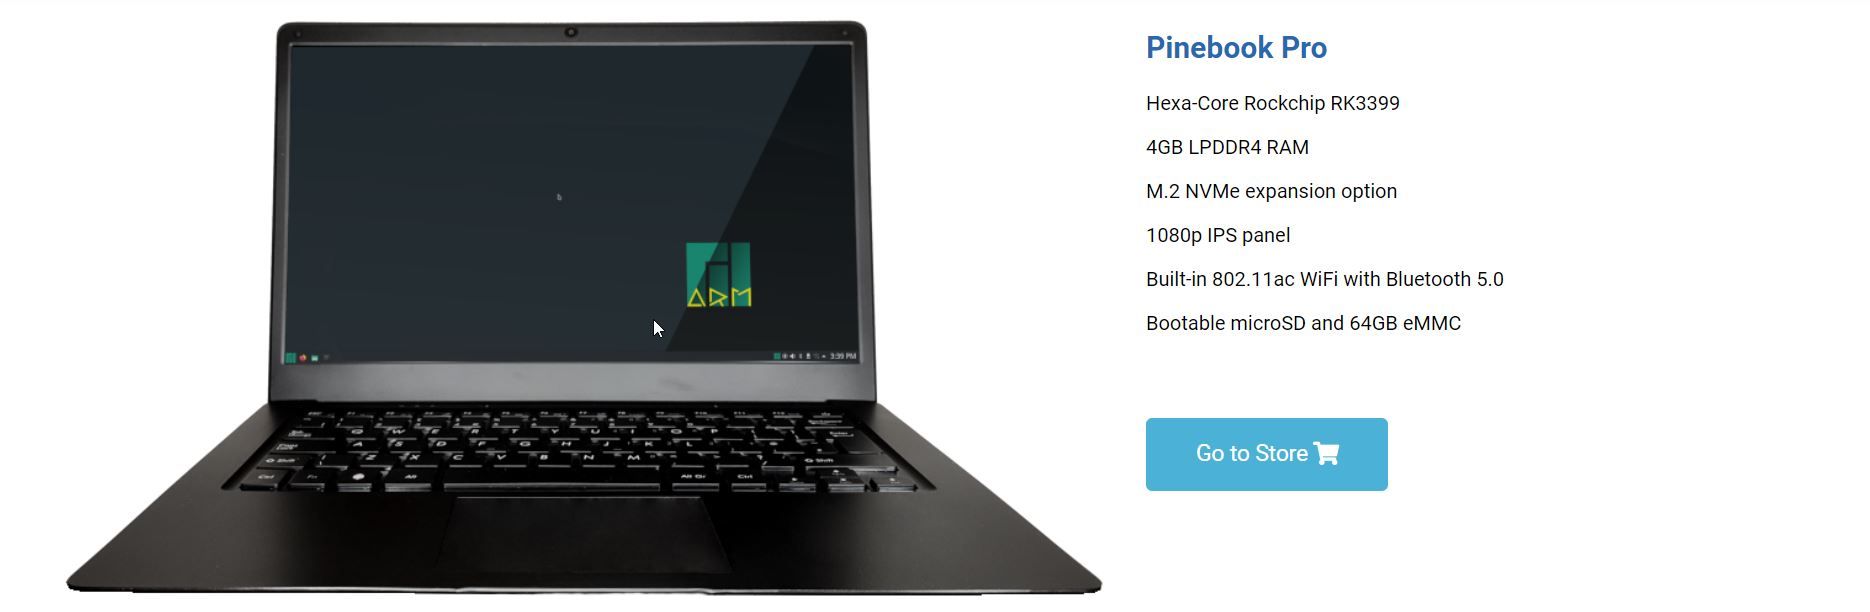 Pinebook Pro on official website